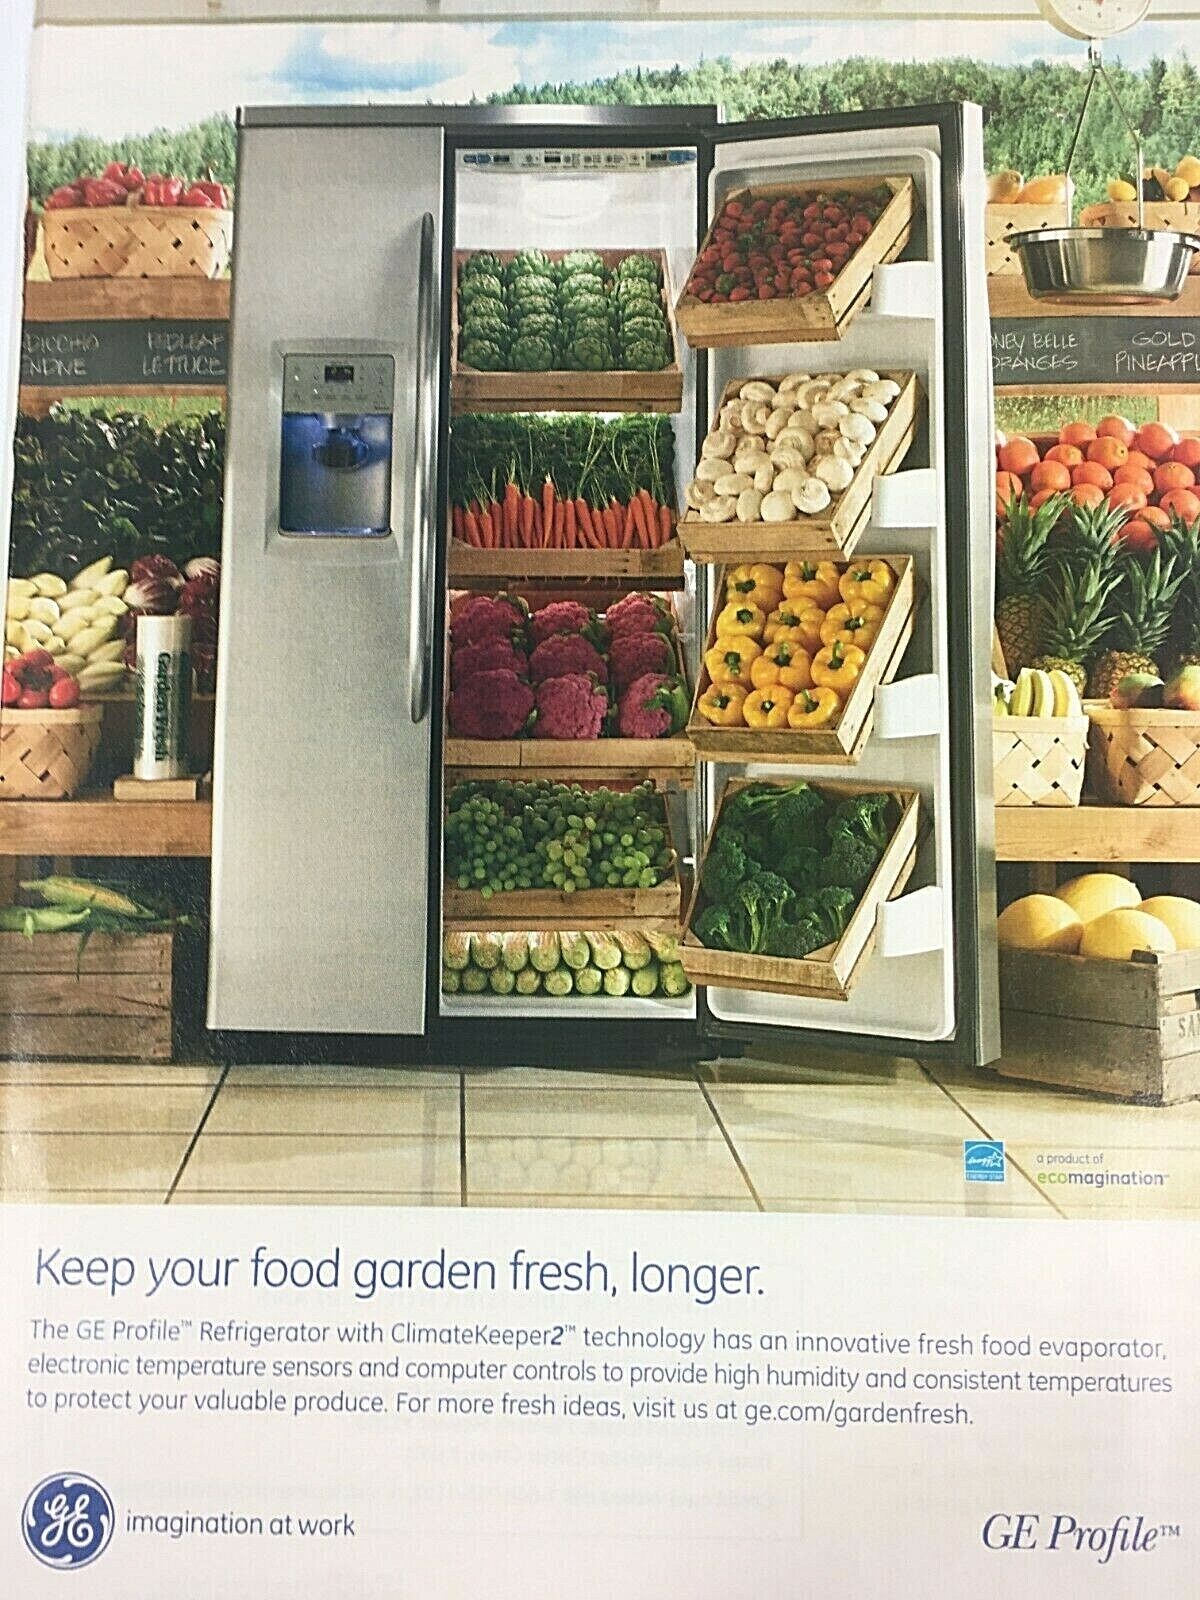 GE Profile Refrigerator Fruits and Vegetables Print Advertisement 